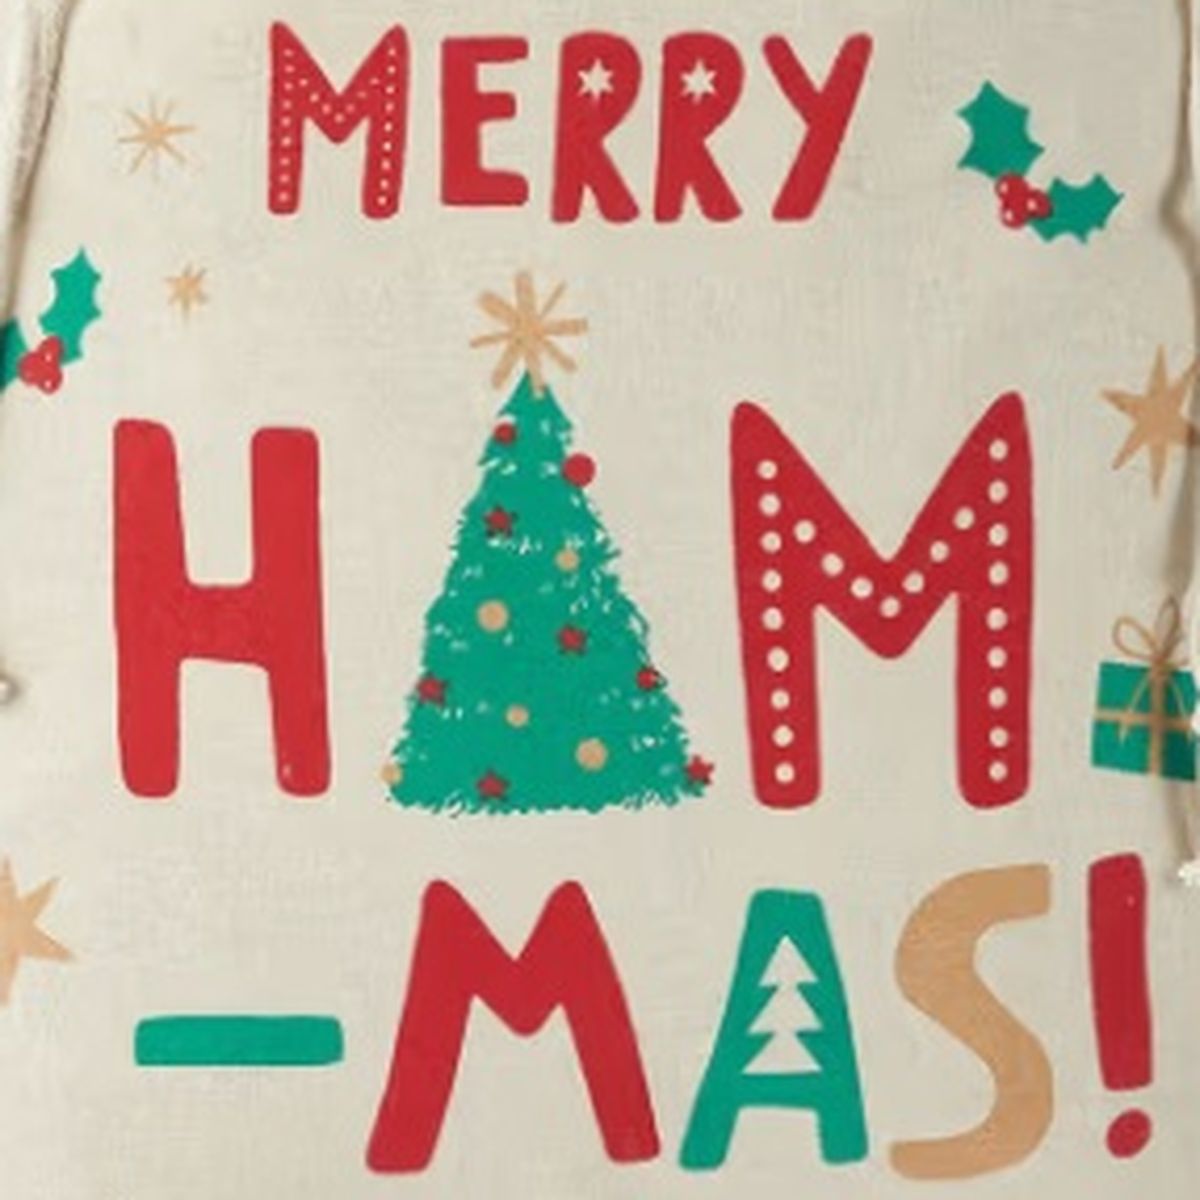 Kmart removes Christmas ham bag after uproar from Jewish community